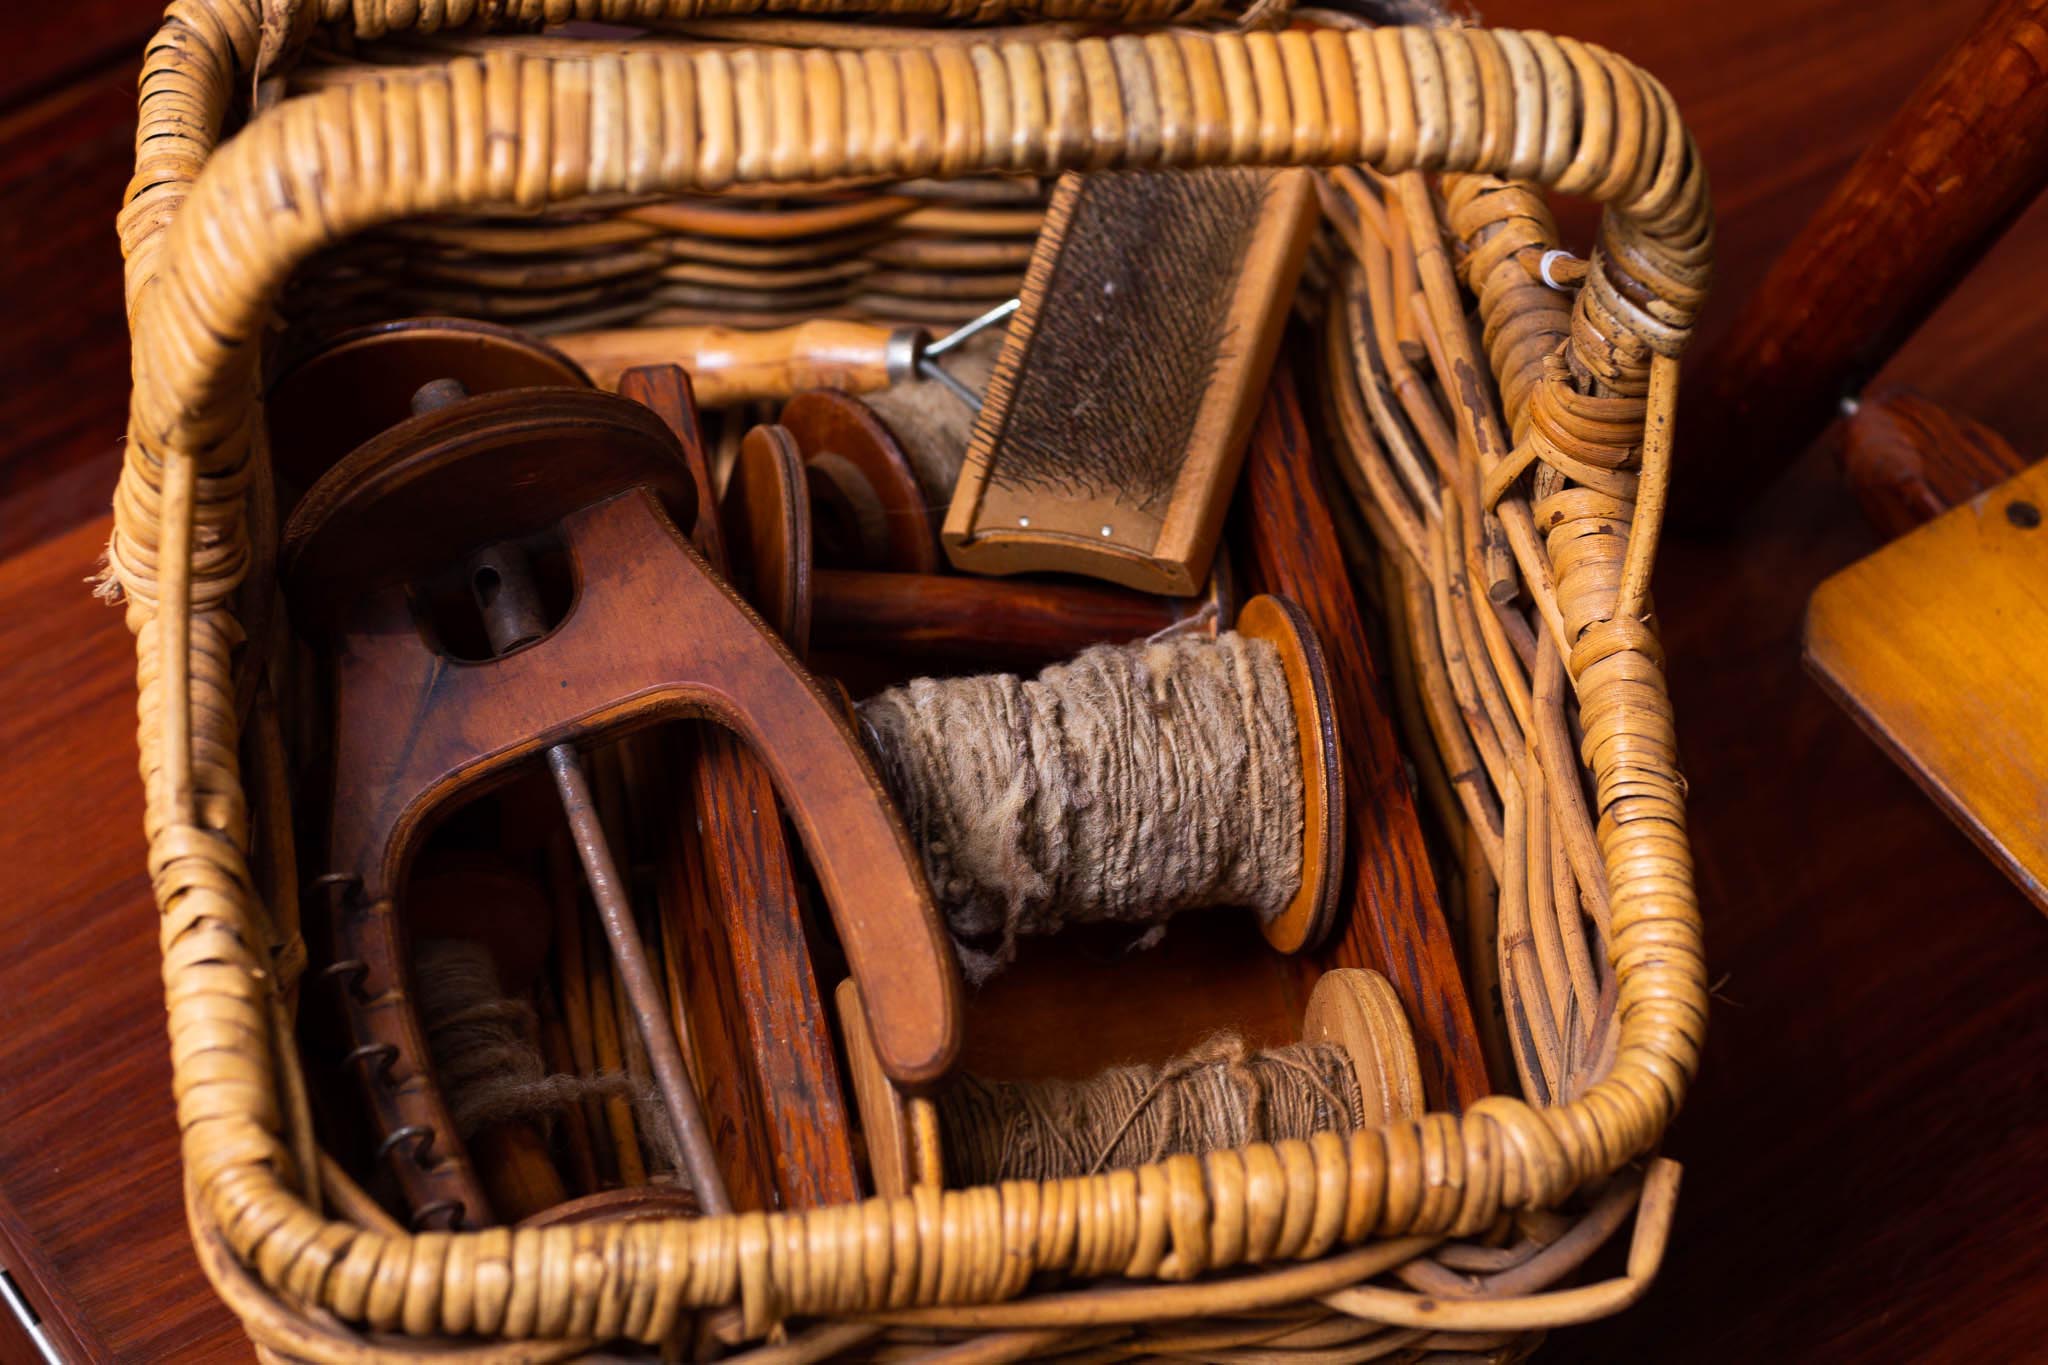 photo of cane basket containing spinning wheel accessories and spun wool. Photo by Caro Telfer.